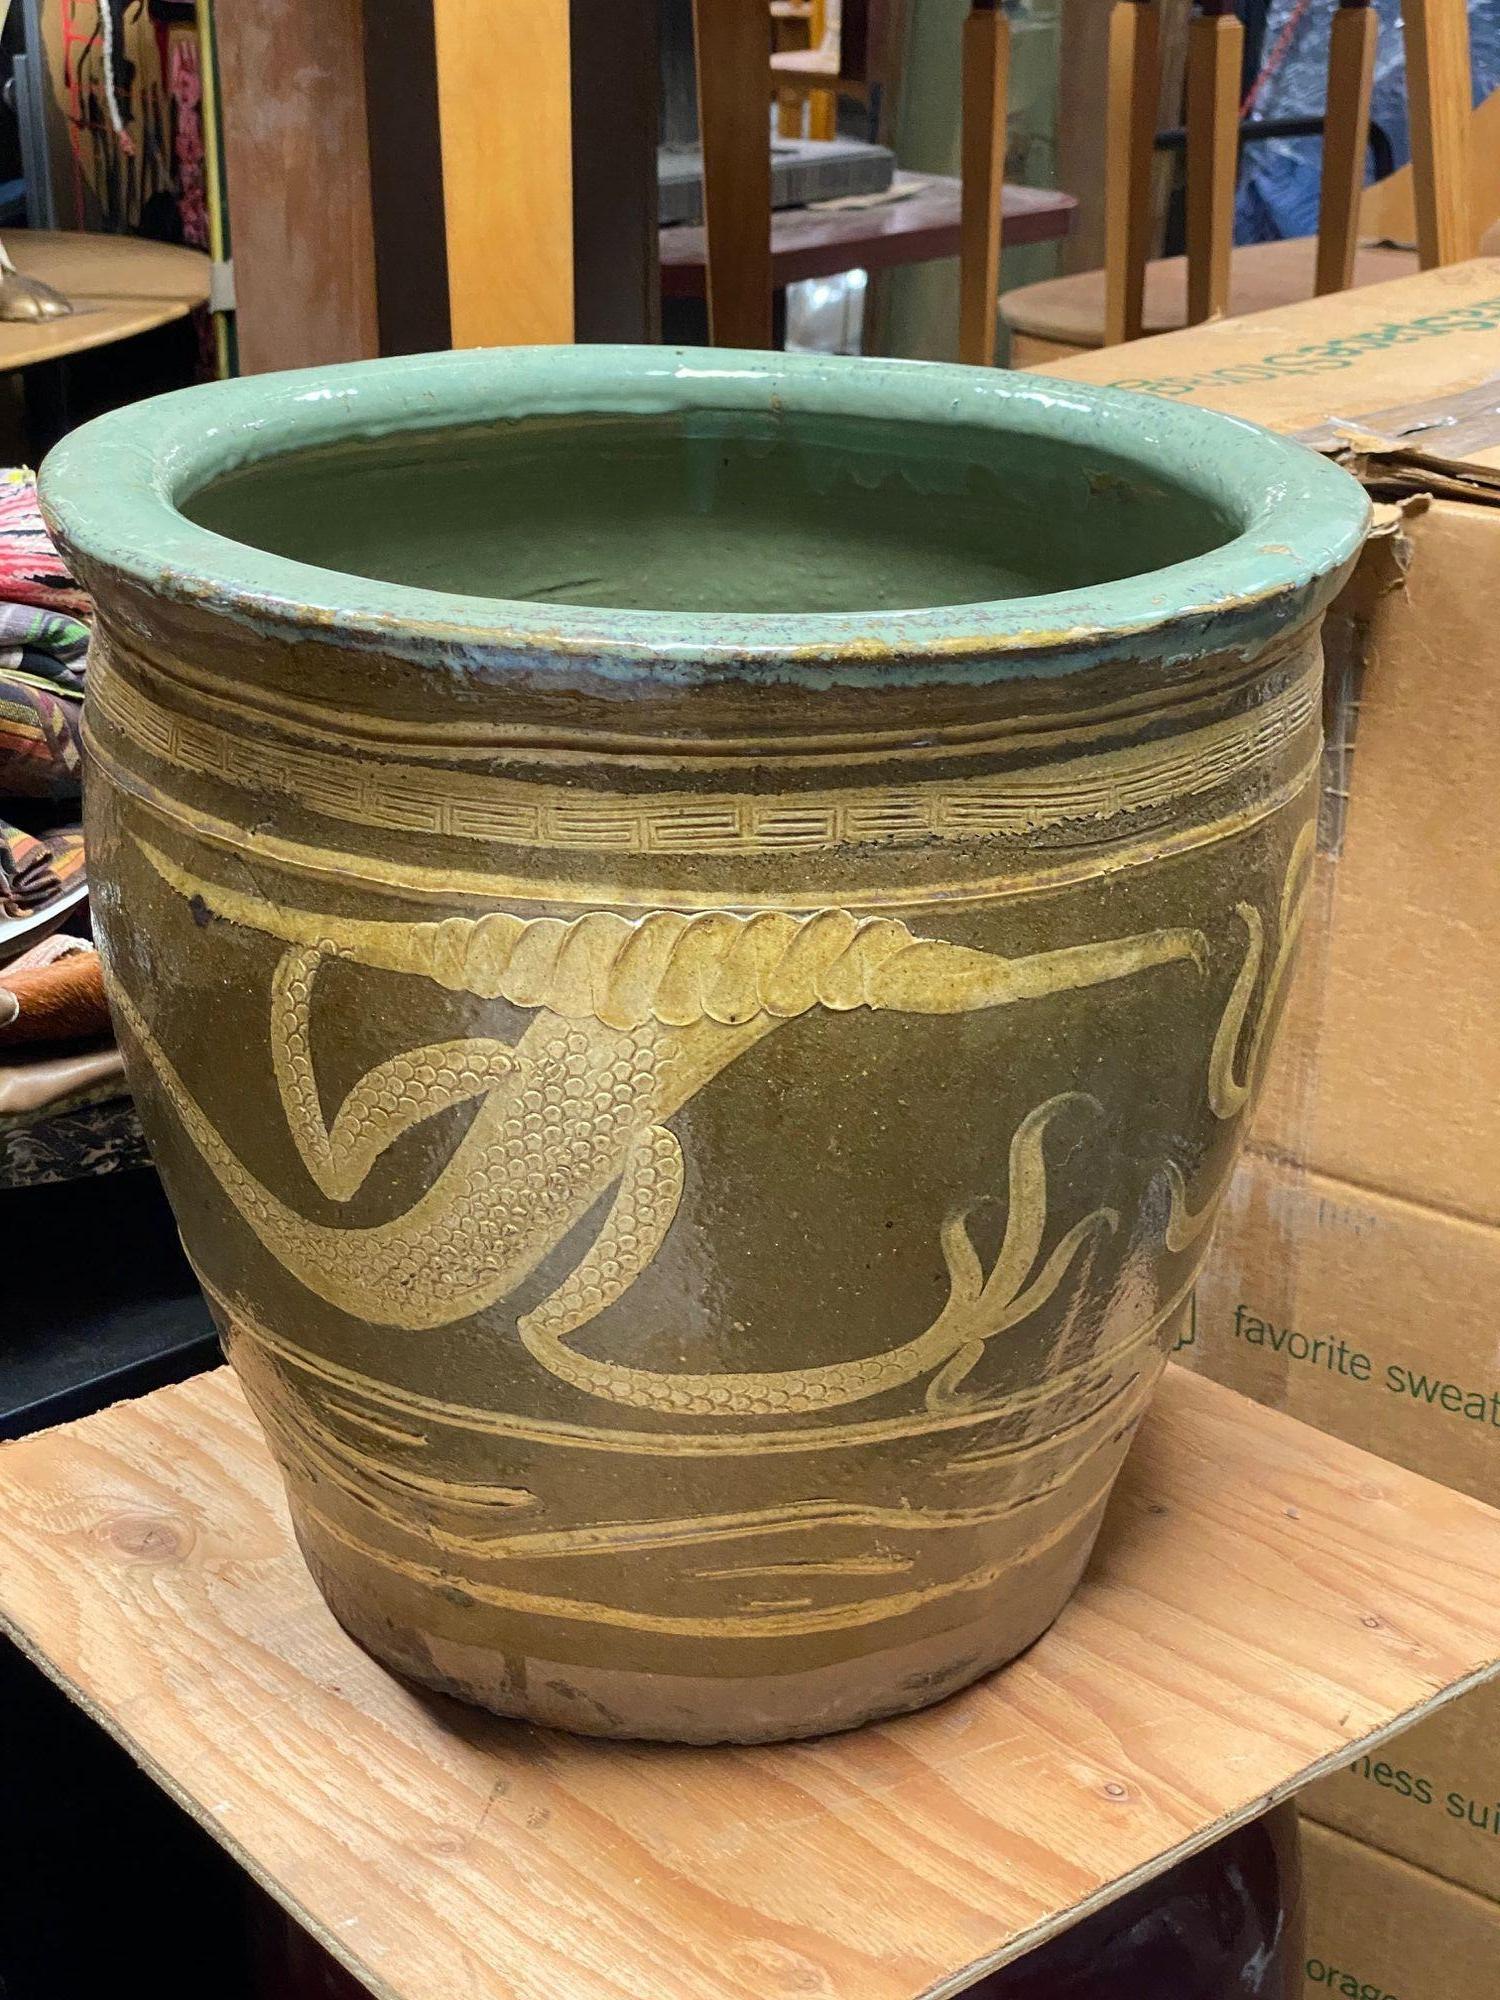 Late 19th Century Century egg Chinese art pottery pot featuring an Asian dragon along the front. These Pots are over 120 years old and were used to store black 